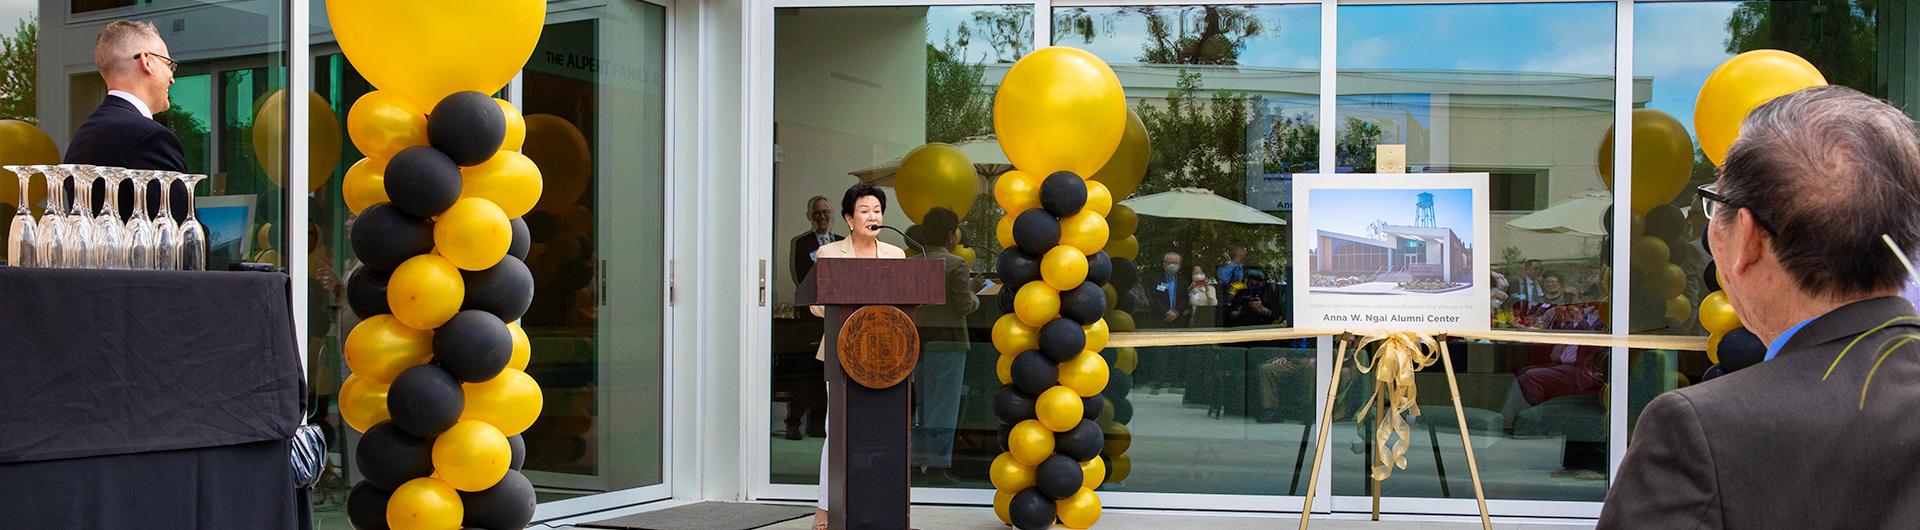 Anna Ngai addresses donors during ribbon cutting ceremony